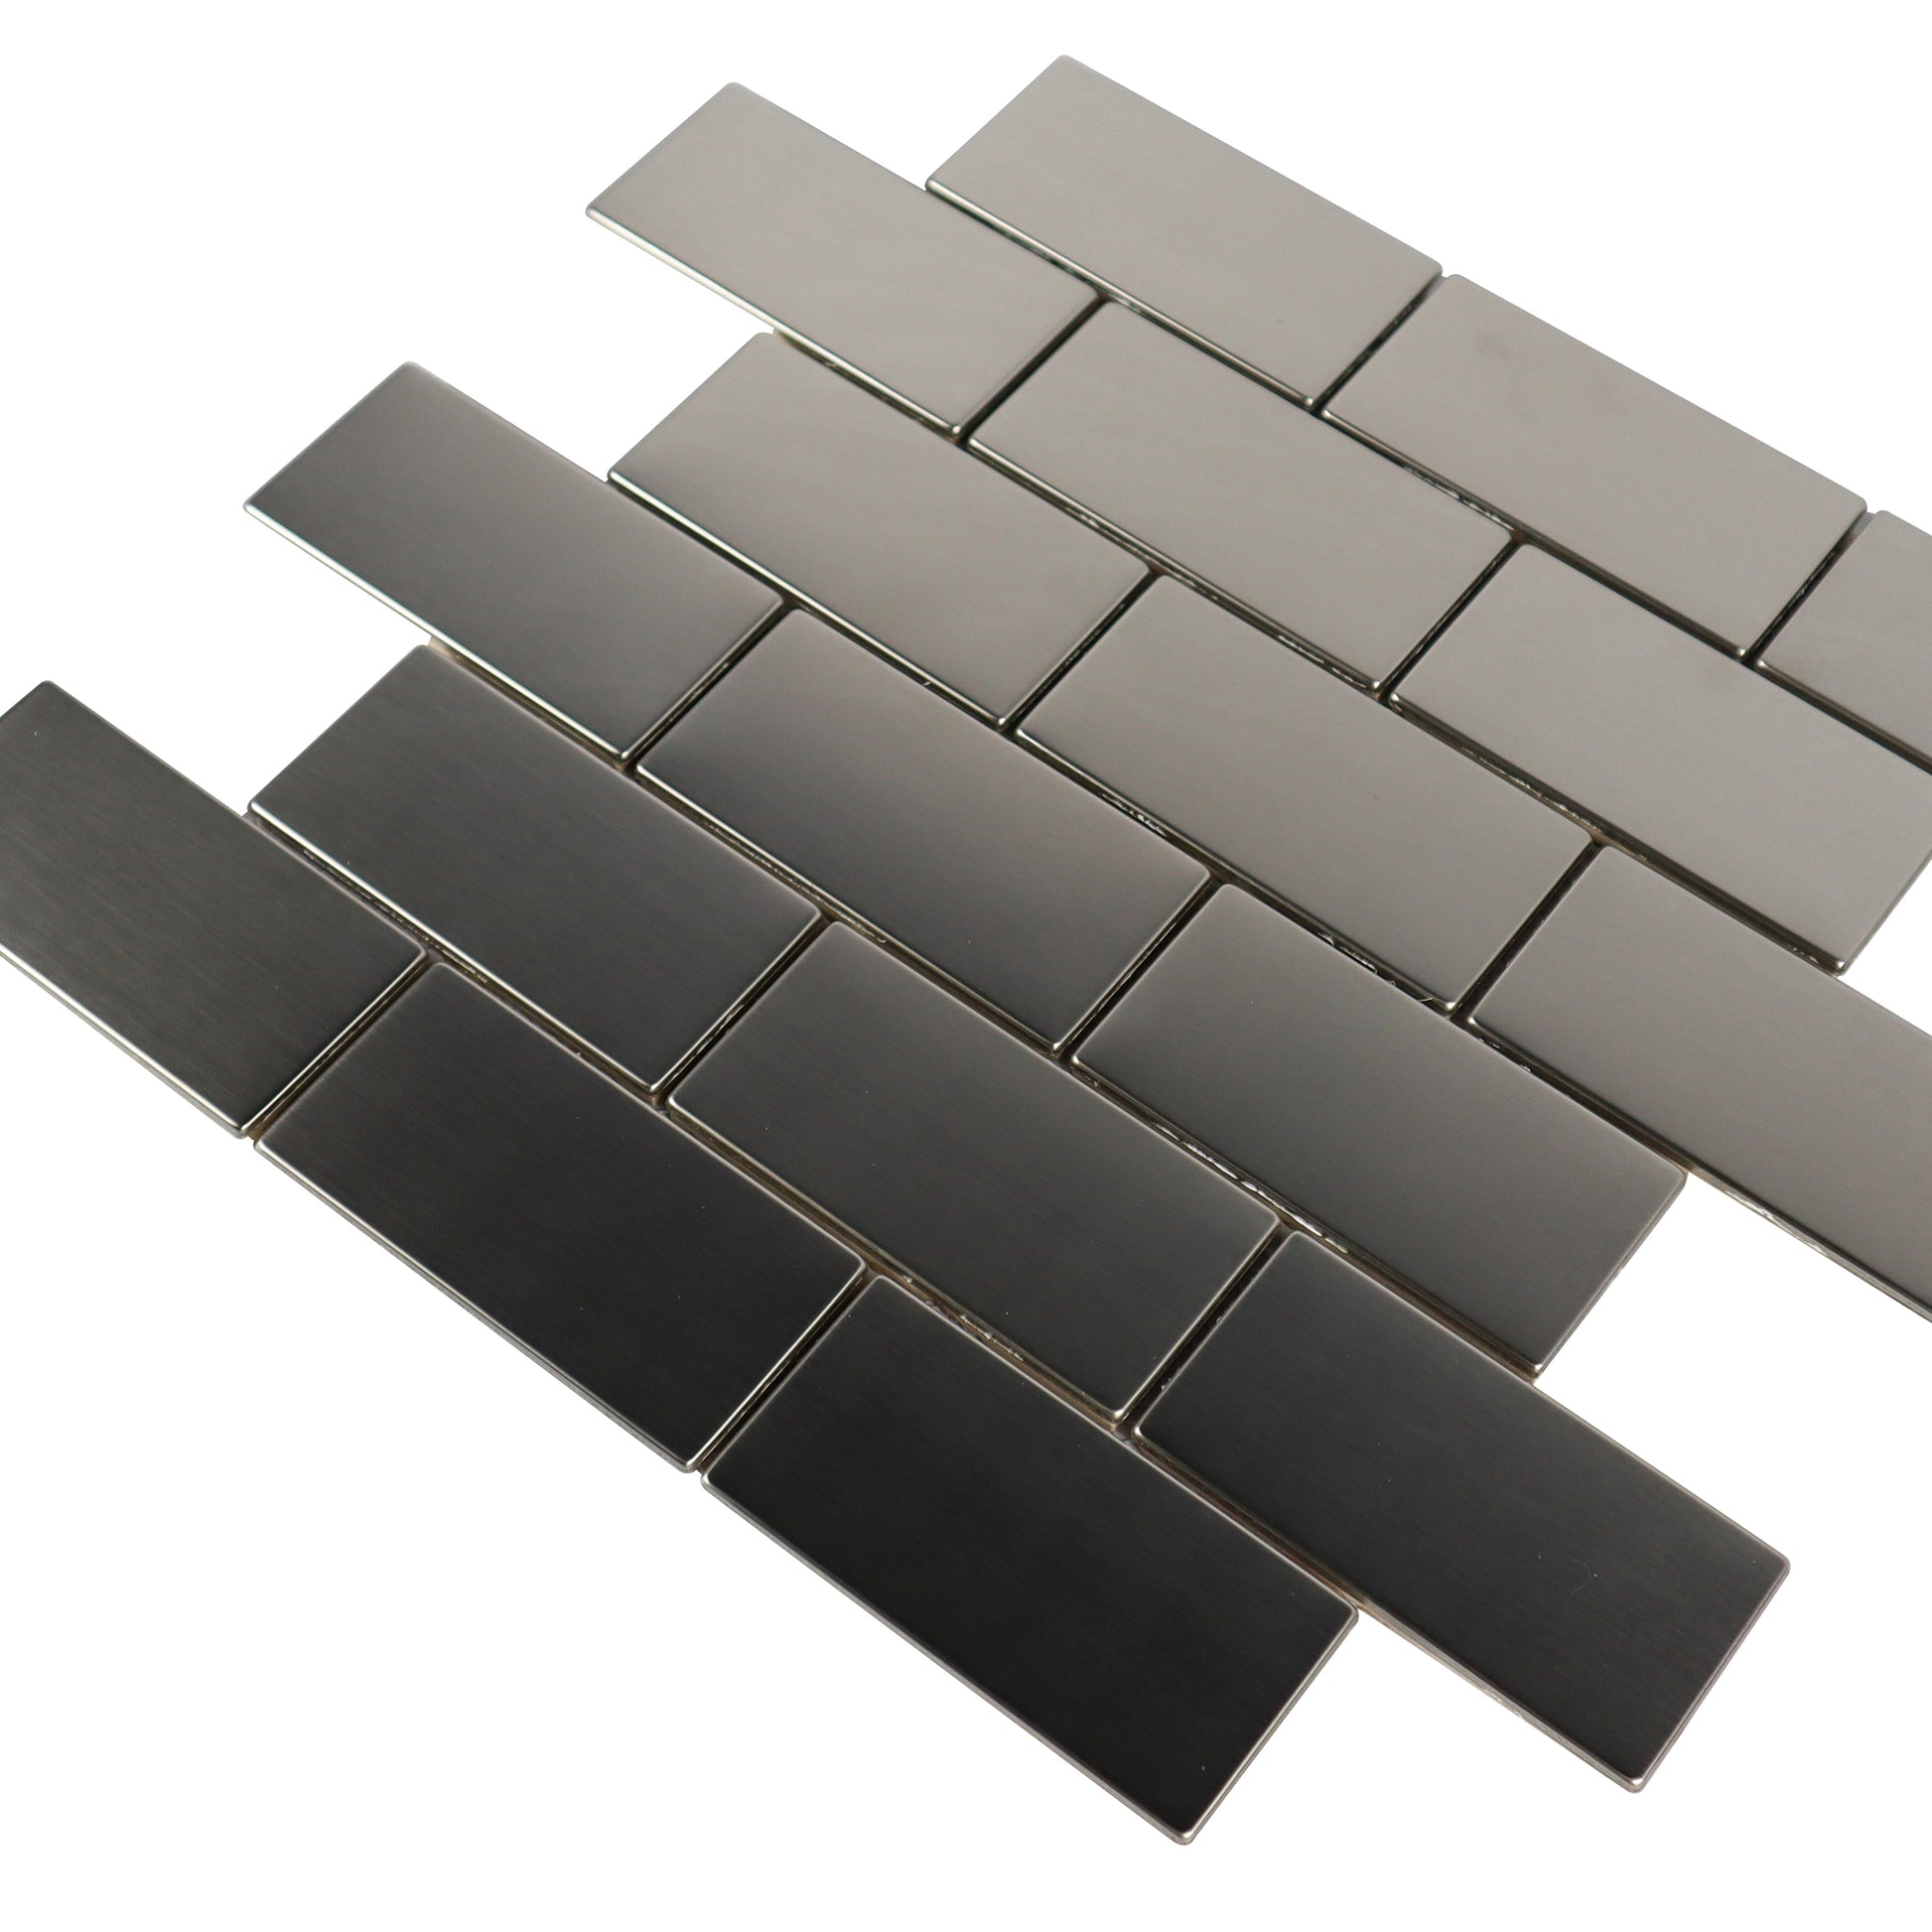  Gray Stainless Steel Mosaic Tile